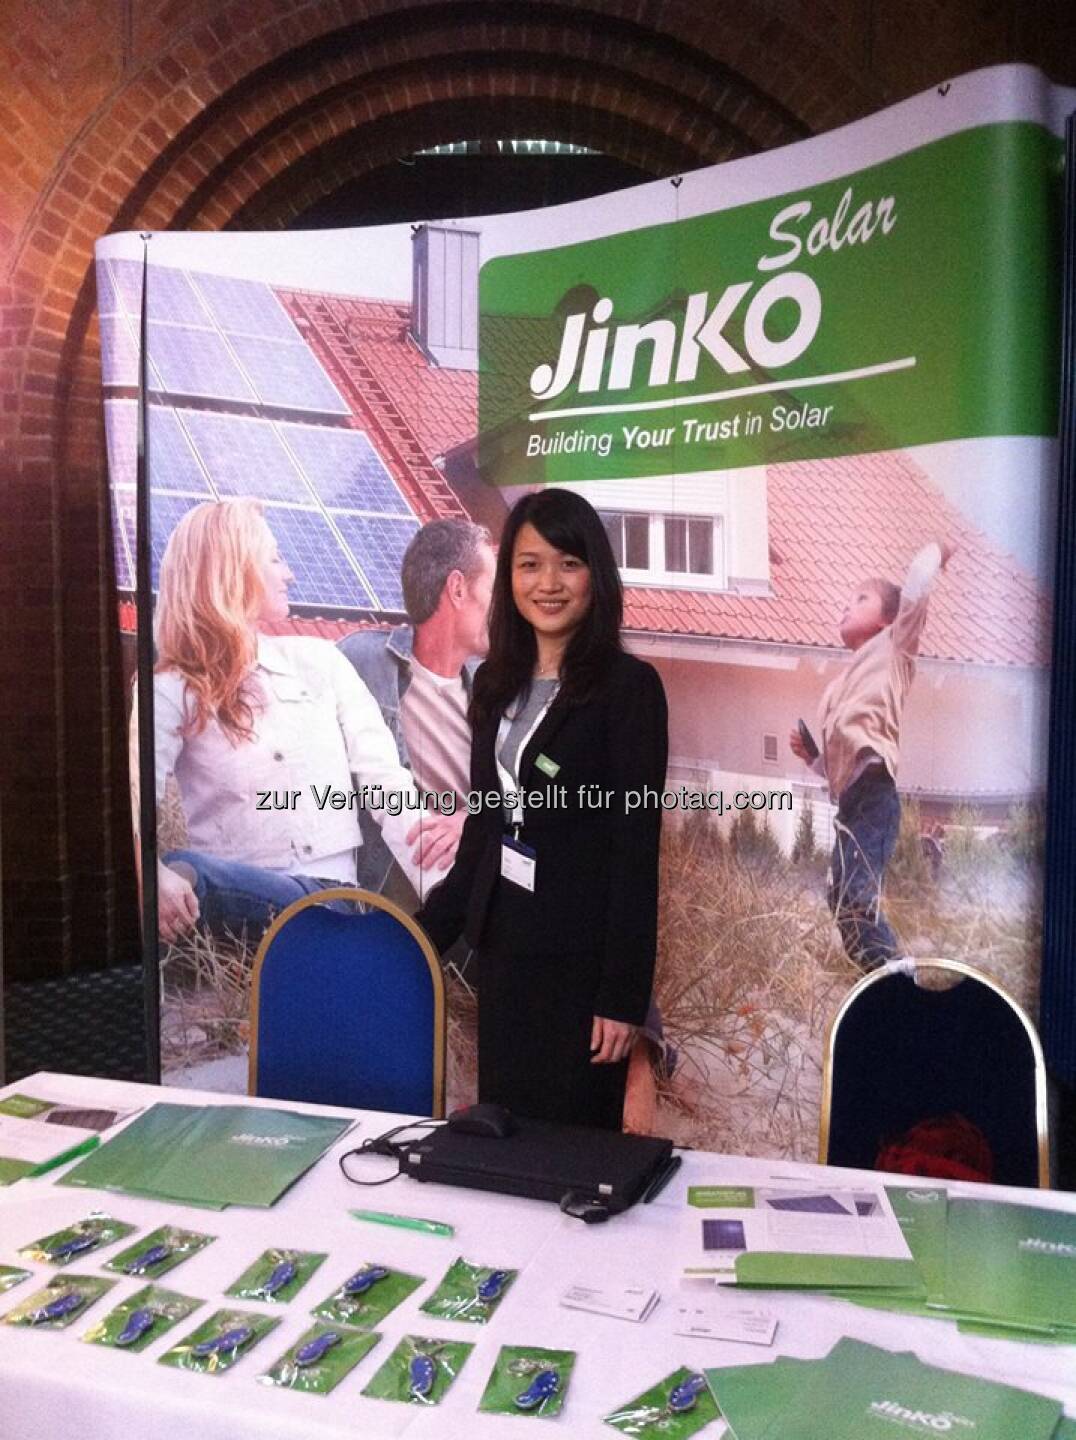 Jinko Solar bei der Large Scale Solar conference in Notts, UK  Source: http://facebook.com/439664686151652